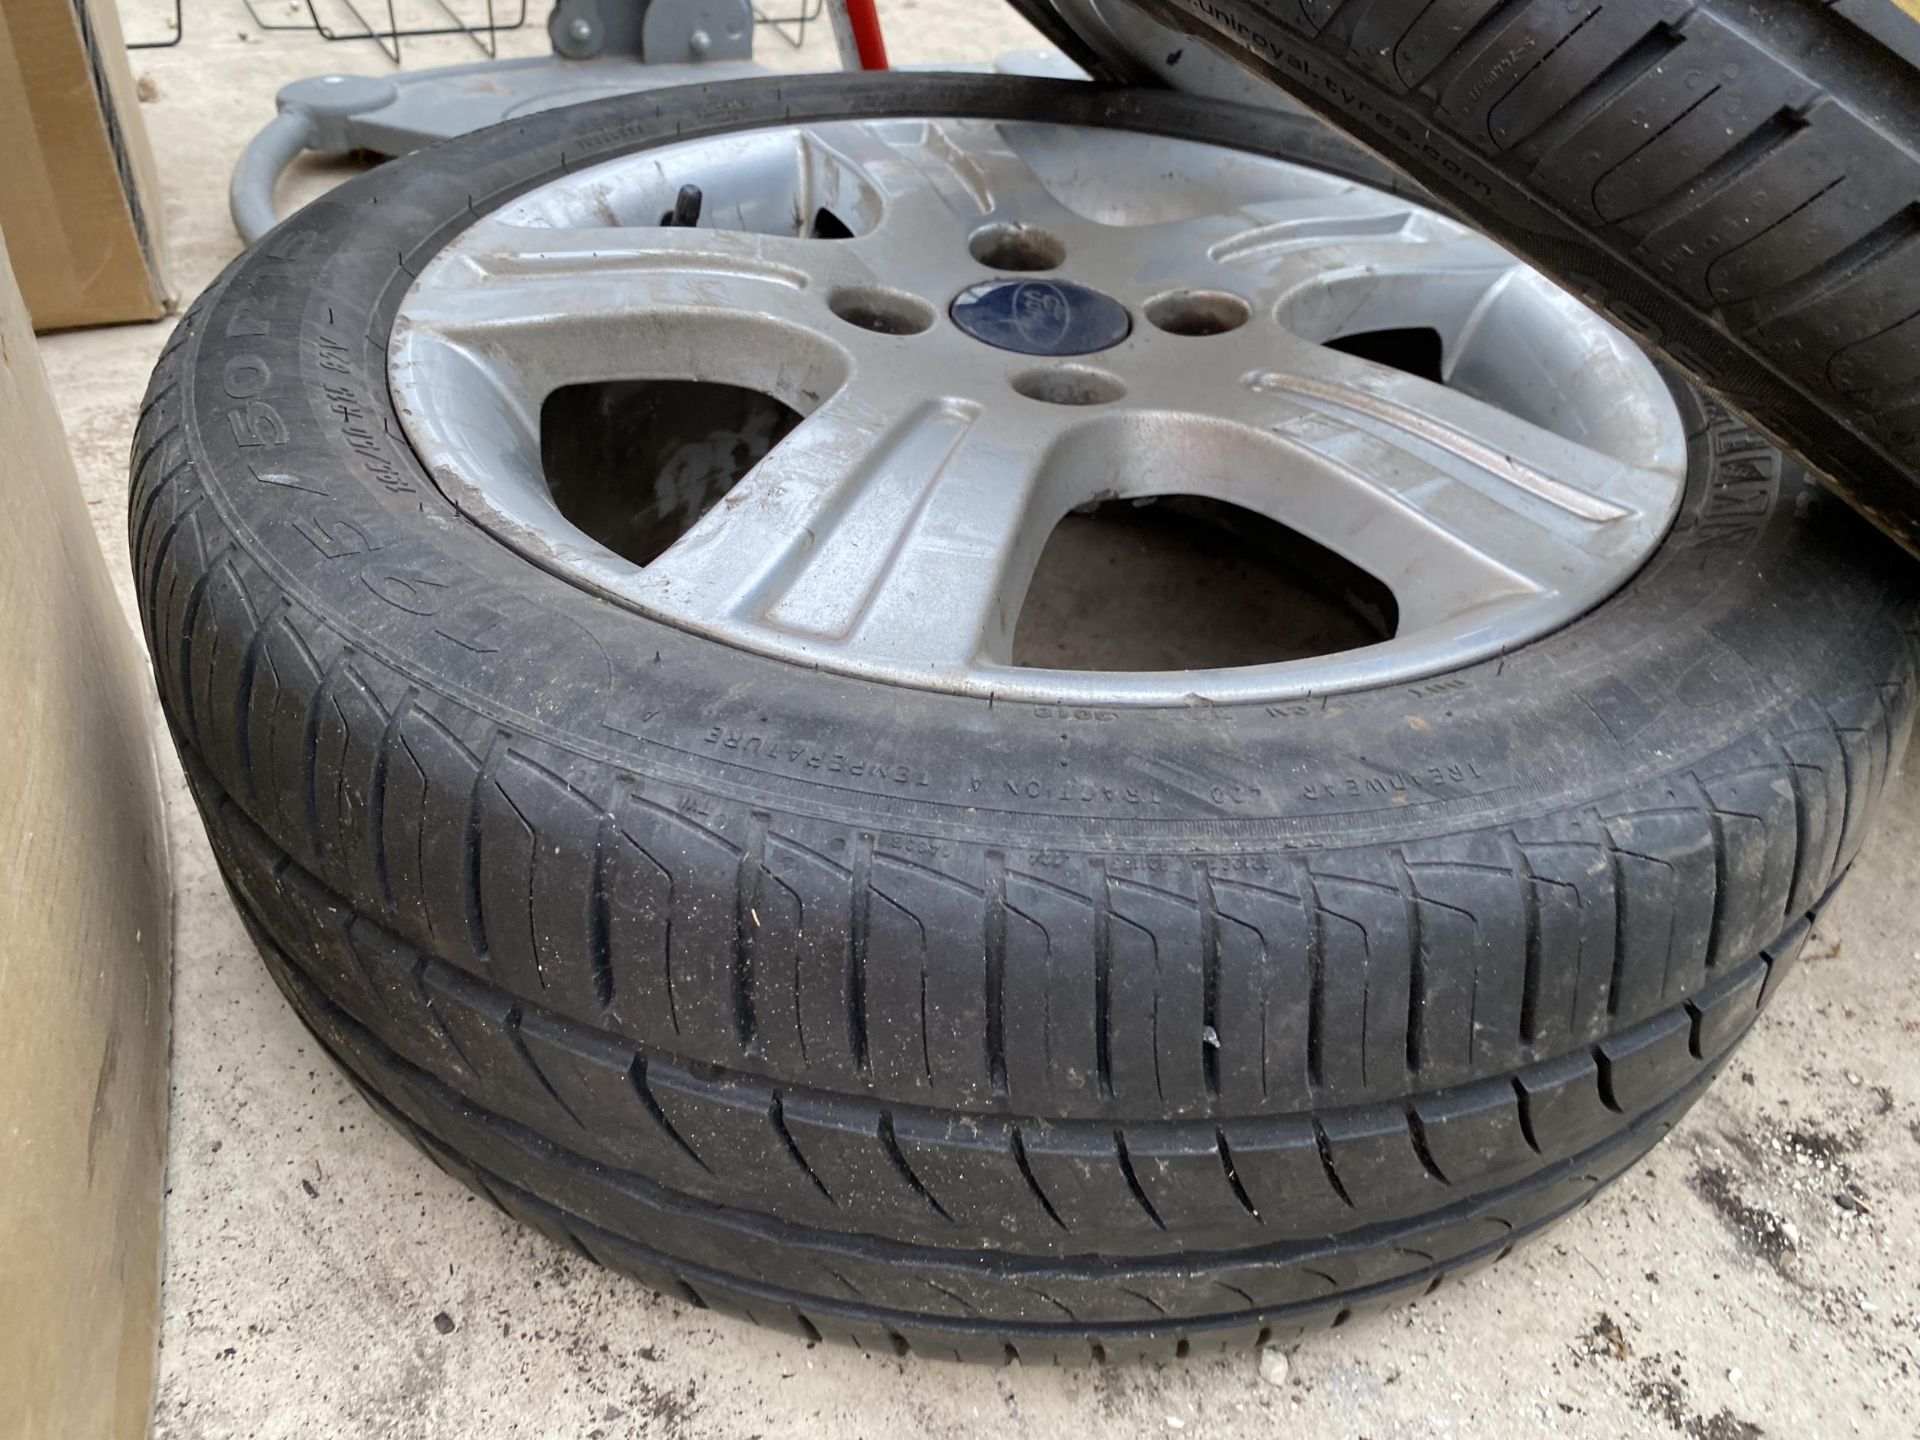 TWO MINI ALLOY WHEELS WITH 195/55 R16 TYRES - Image 2 of 4